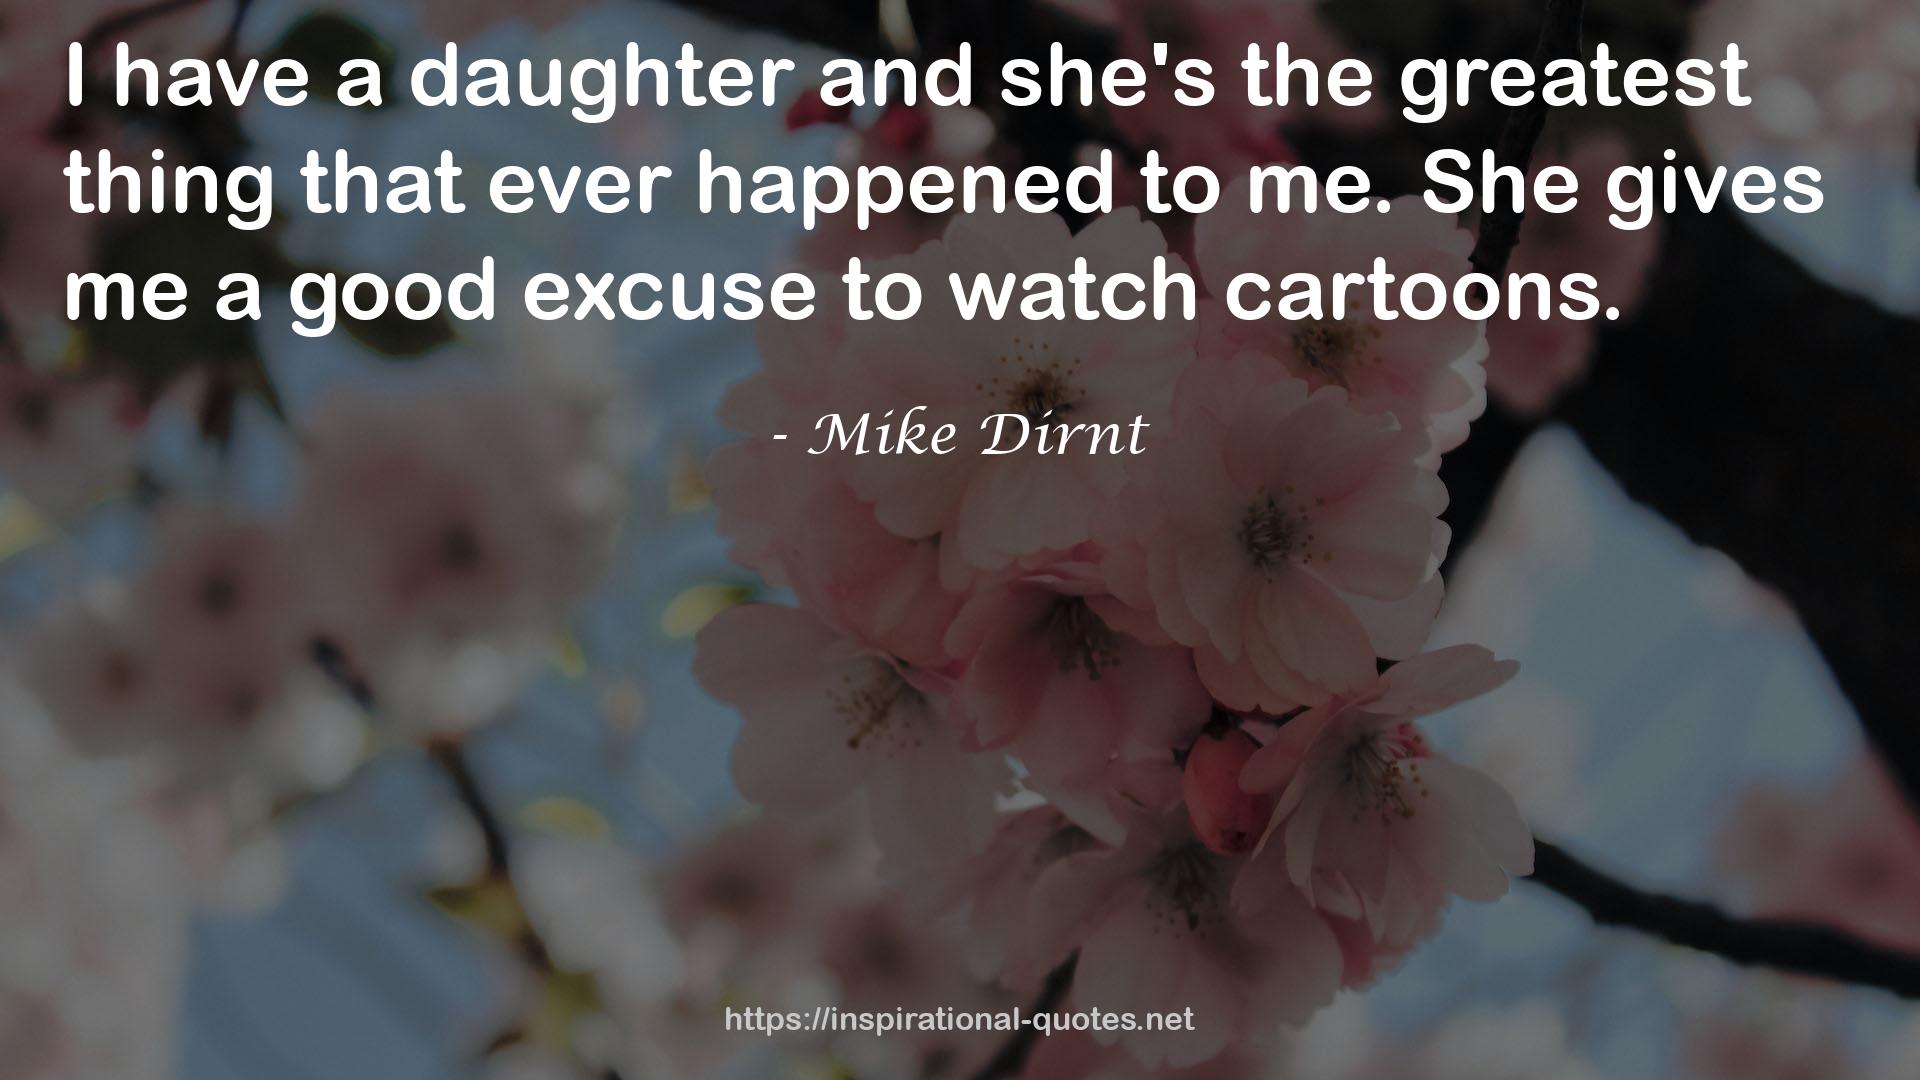 Mike Dirnt QUOTES